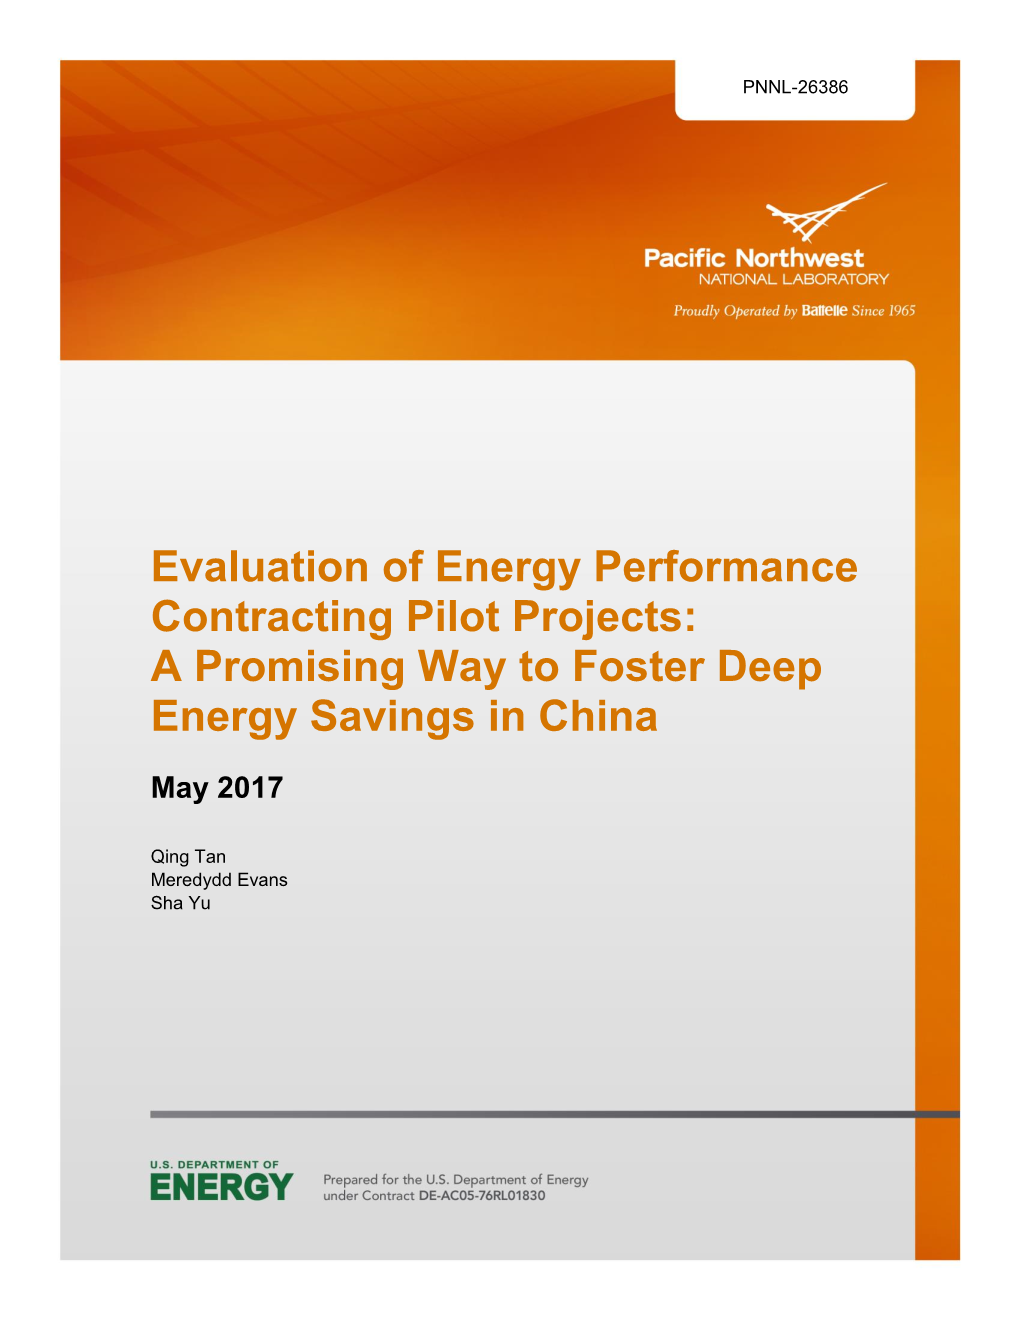 Evaluation of Energy Performance Contracting Pilot Projects: a Promising Way to Foster Deep Energy Savings in China